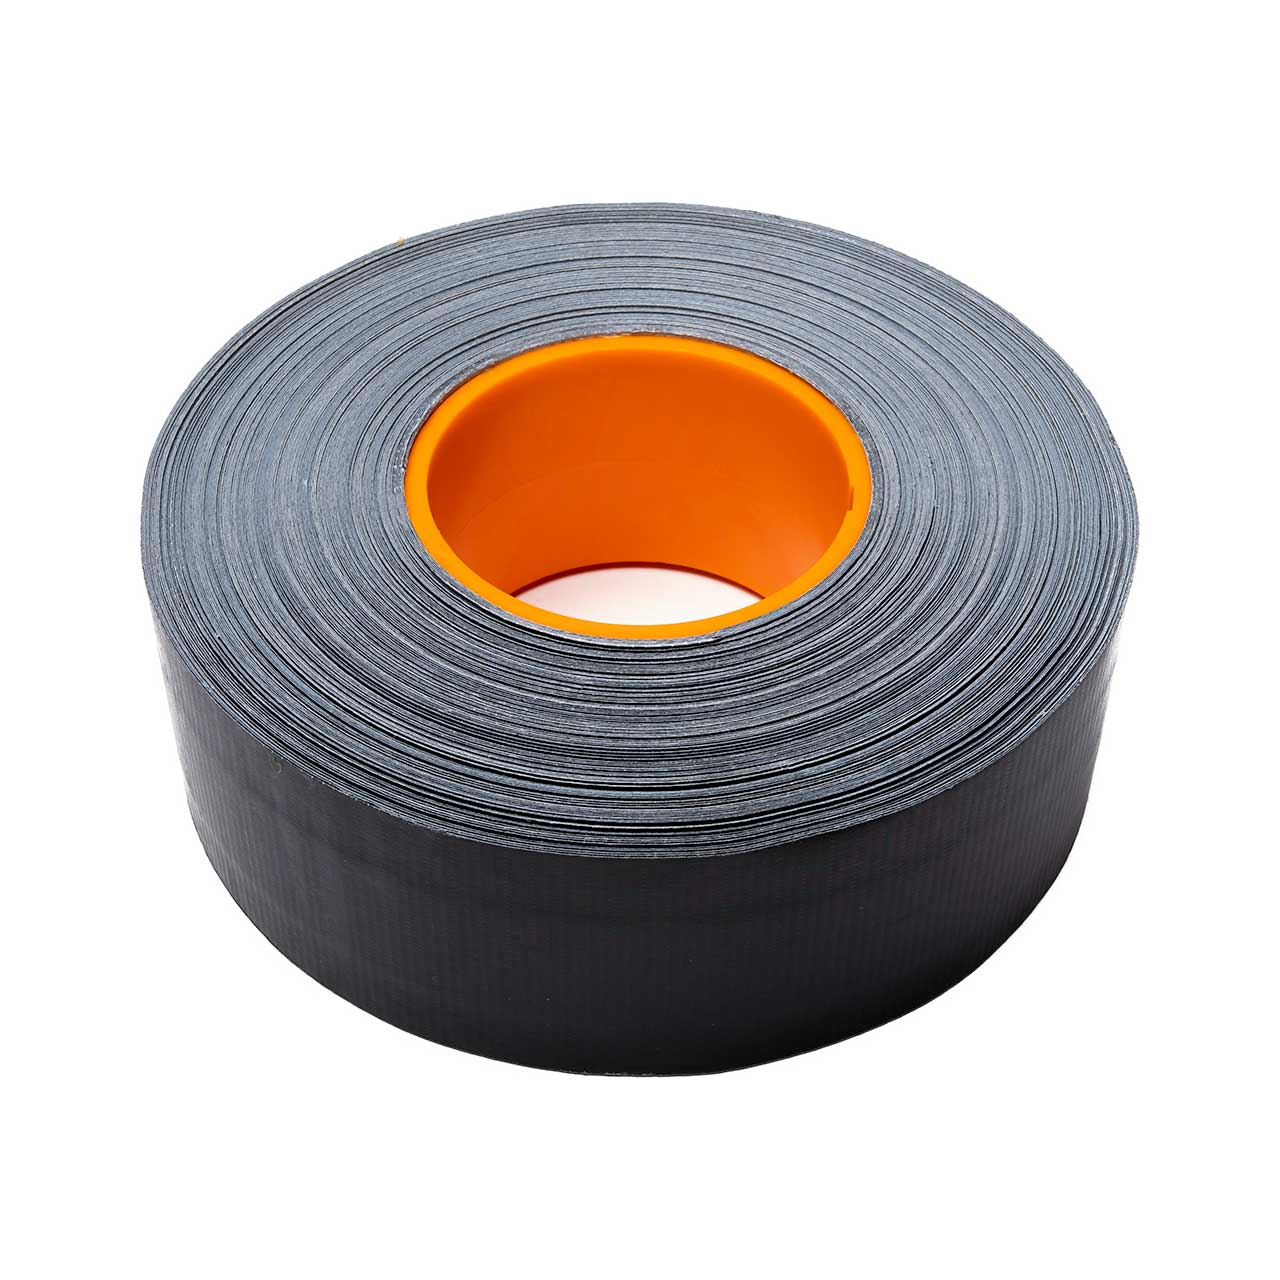 GaffTech 2-Inch Matte Black Dry Channel Cable Path Tunnel Duct Tape for GaffGun - 55 Yard Roll GAF-AVDC255-BK